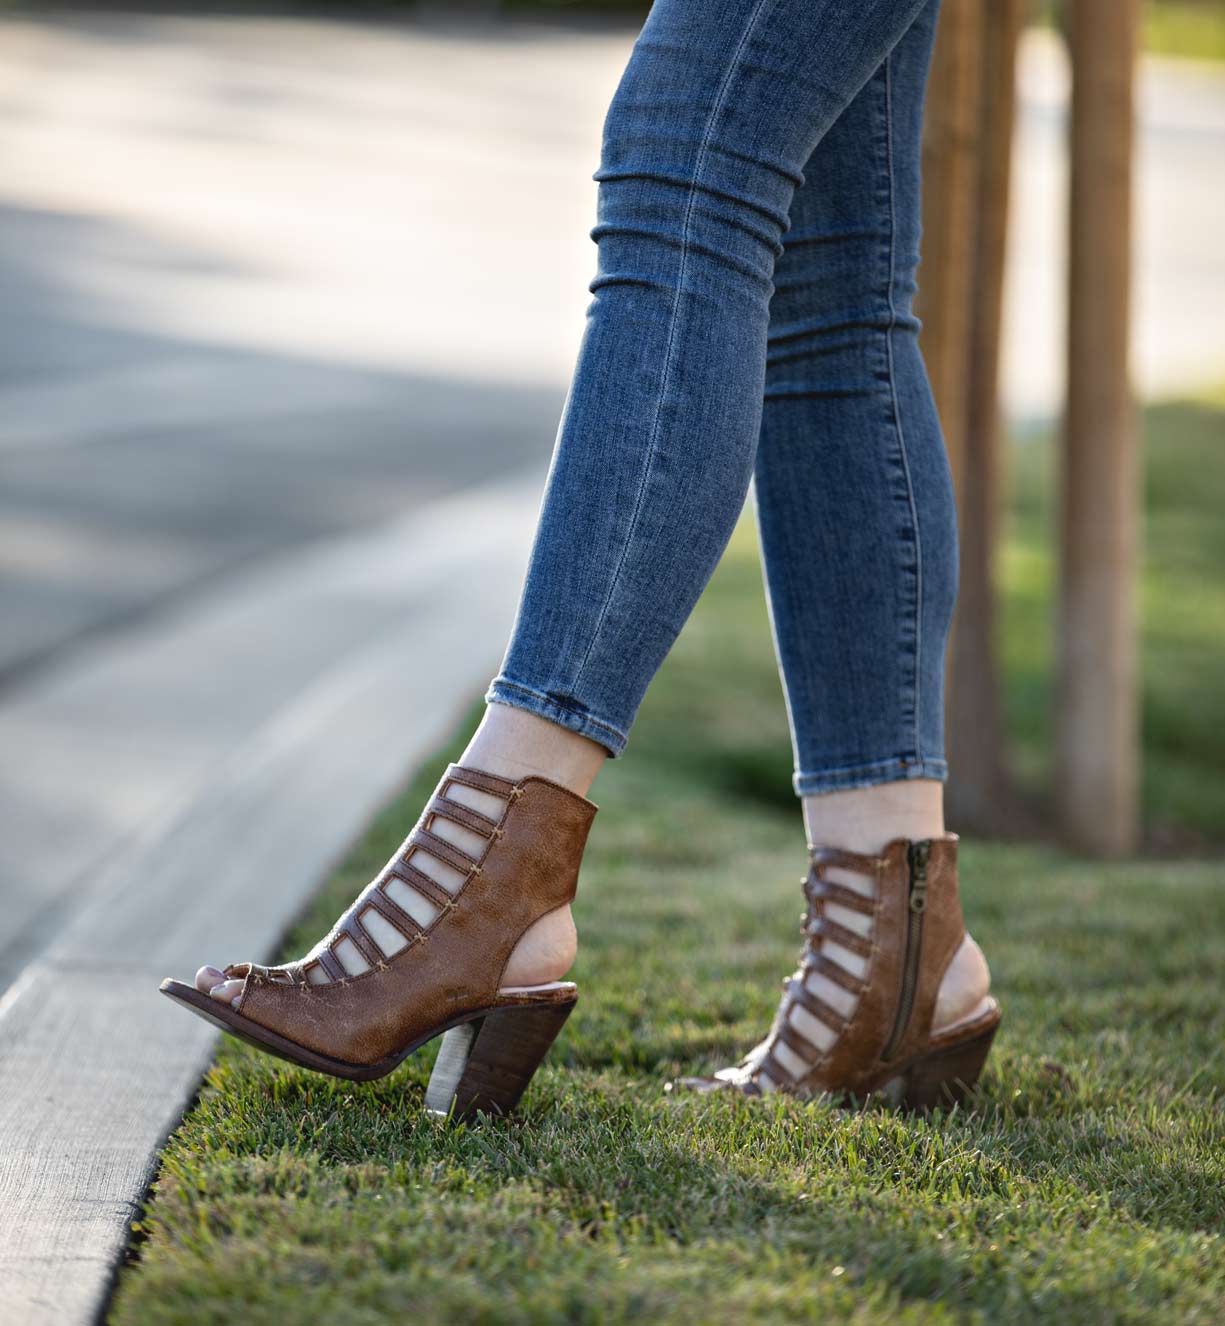 A woman wearing jeans and a pair of Bed Stu Occam P high heeled sandals.